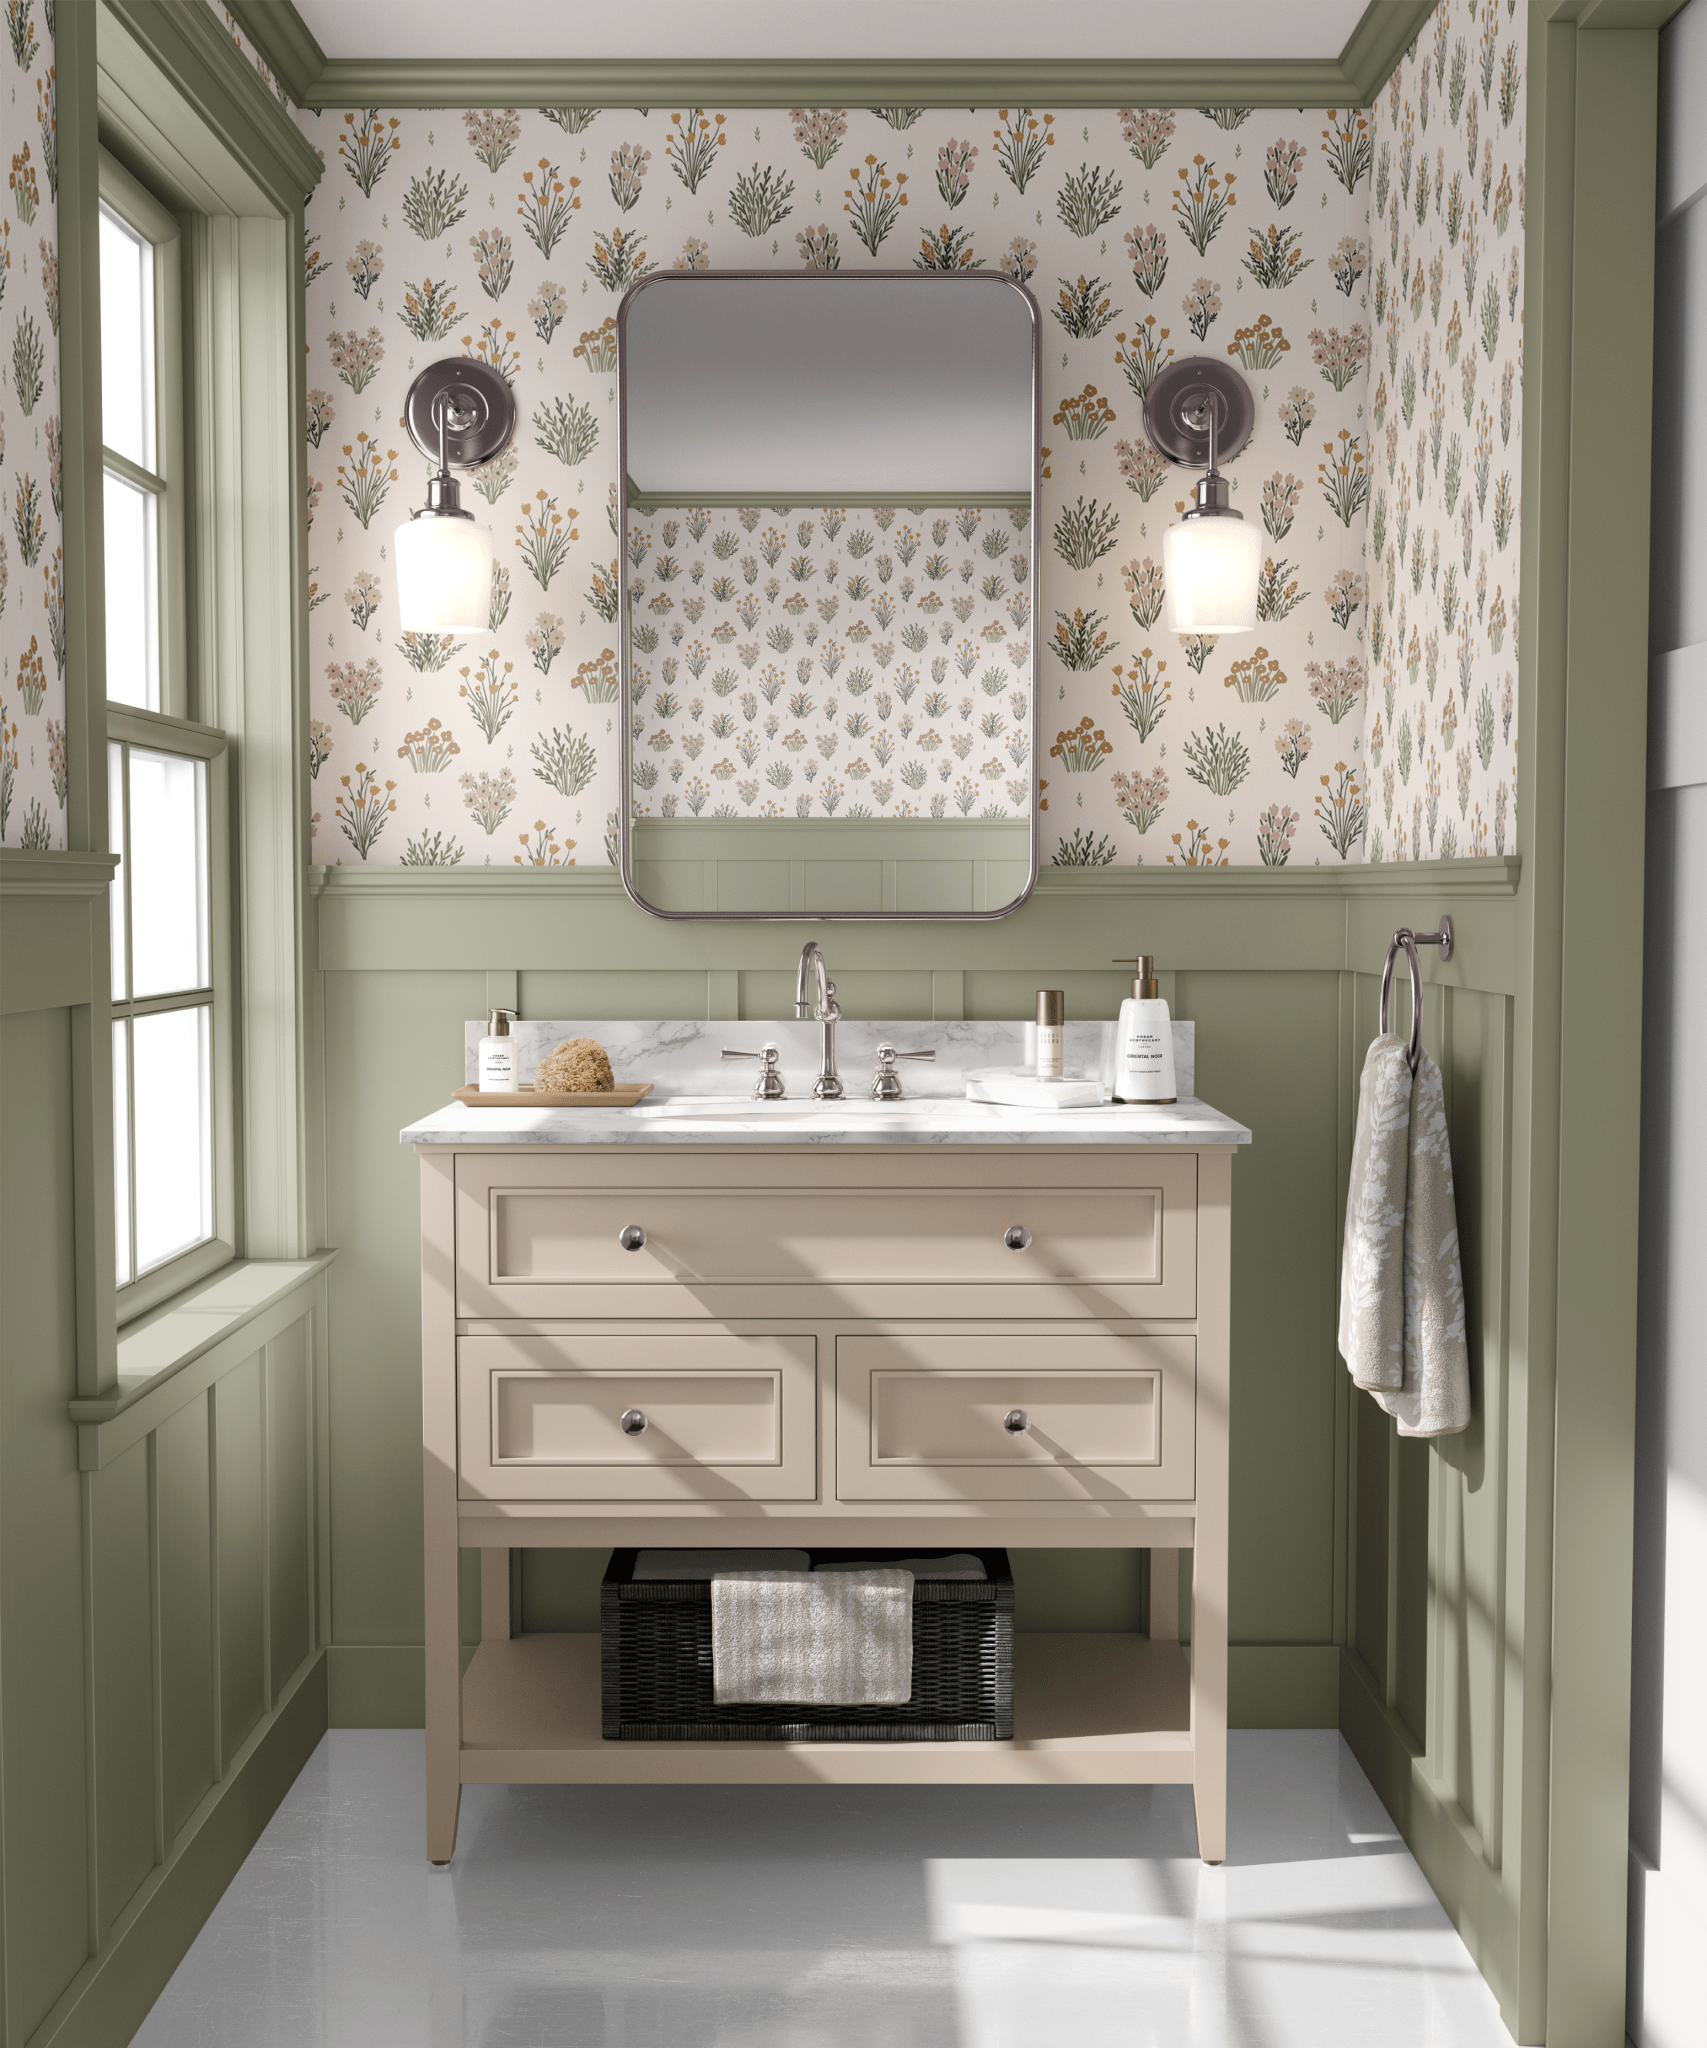 A bathroom with pastel floral wallpaper, sage green wainscoting, and a beige vanity set against a marble floor